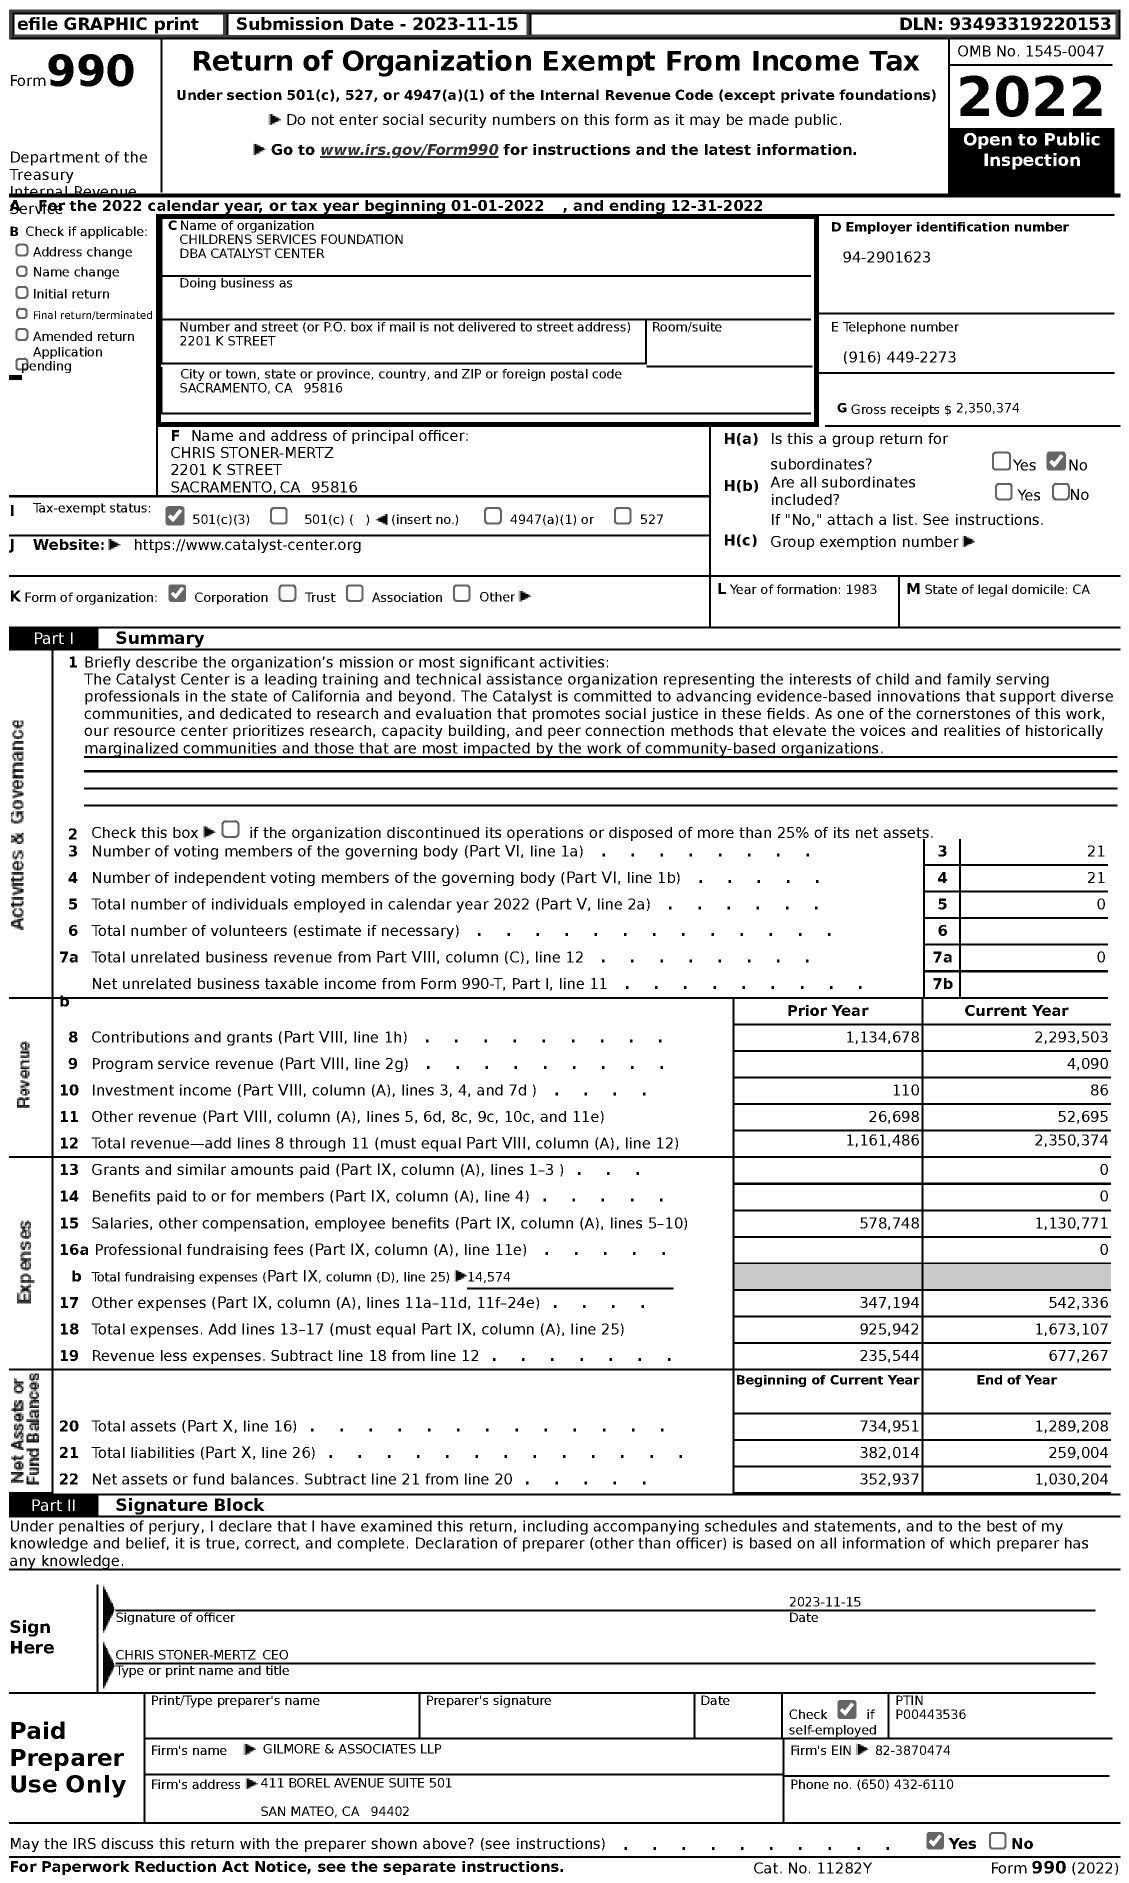 Image of first page of 2022 Form 990 for Catalyst Center / Childrens Services Foundation